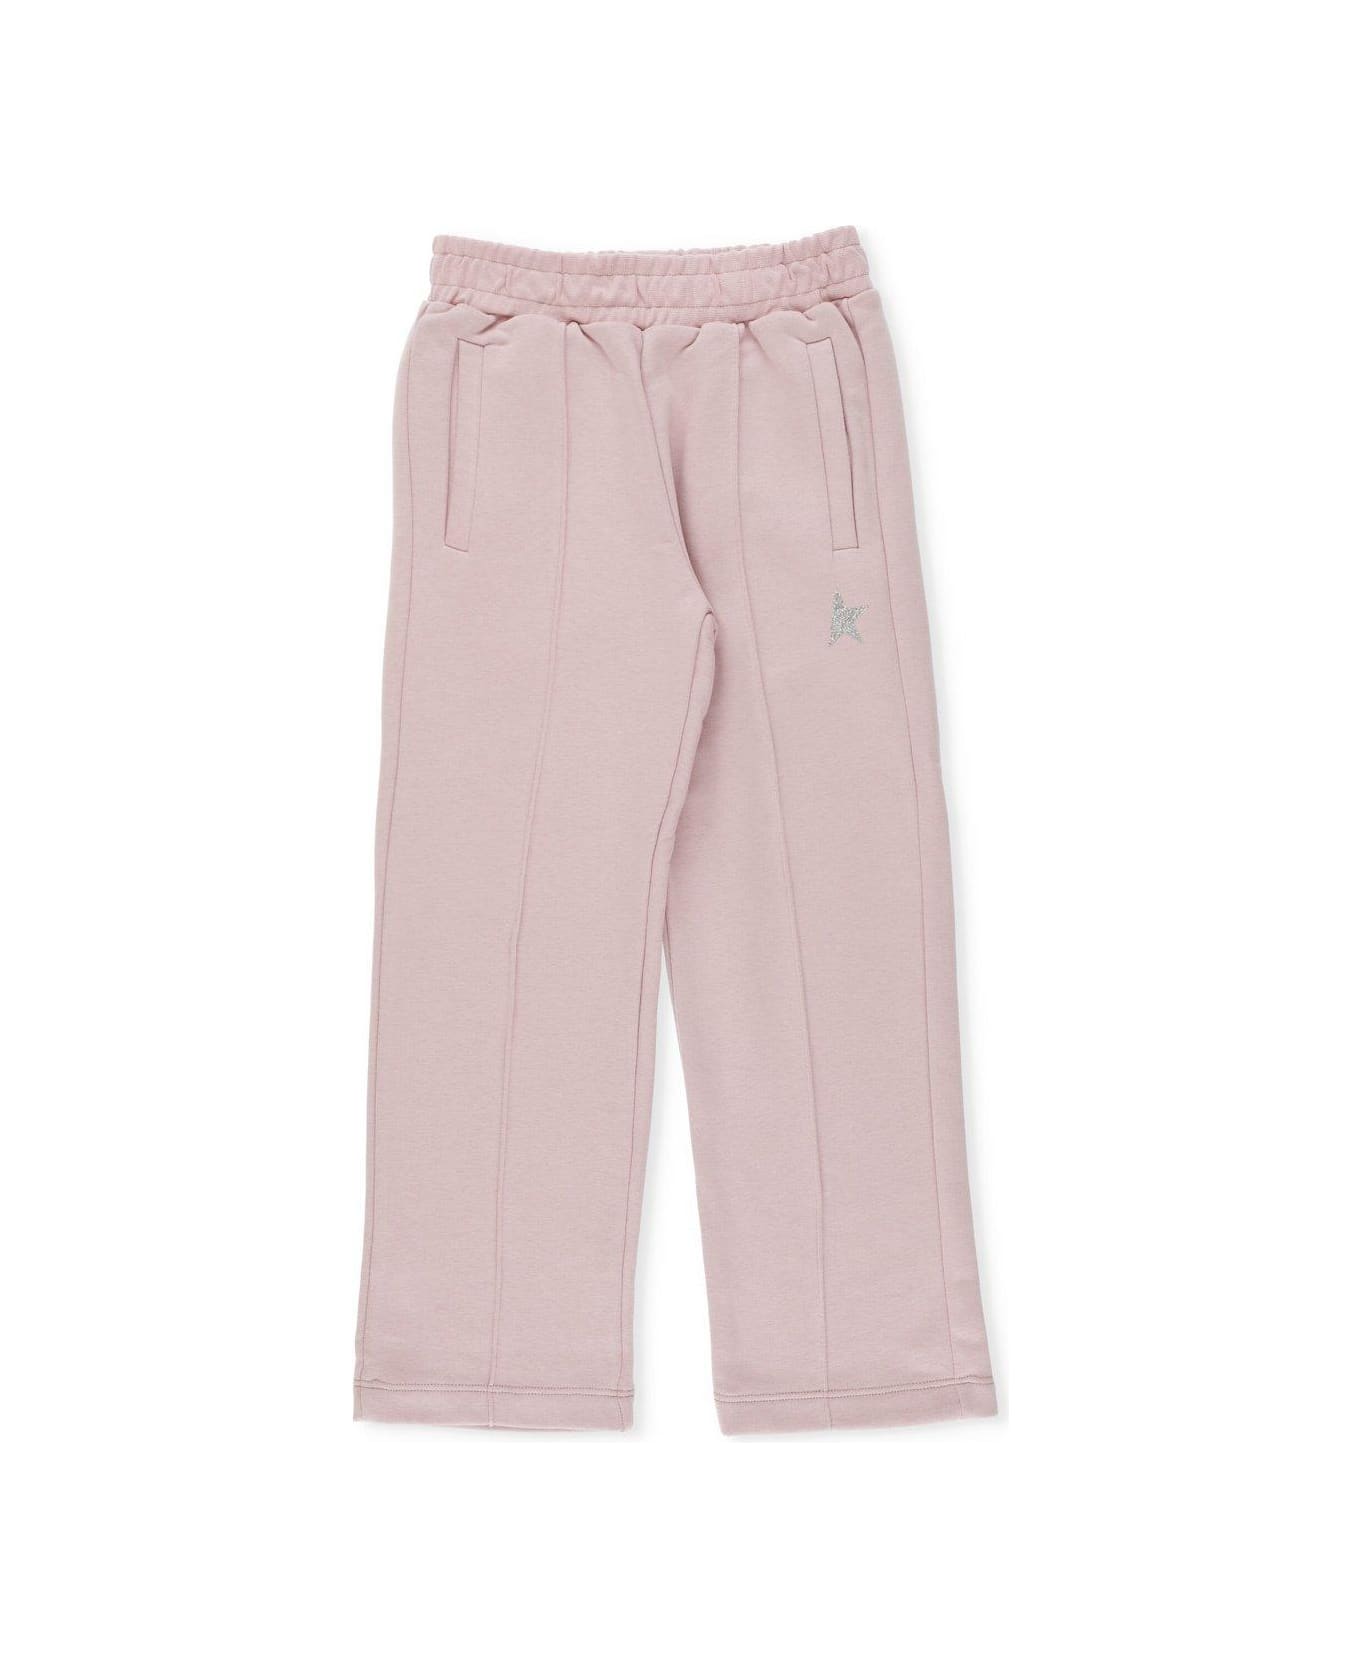 Golden Goose Logo Detailed Straight Leg Trousers - Pink/silver